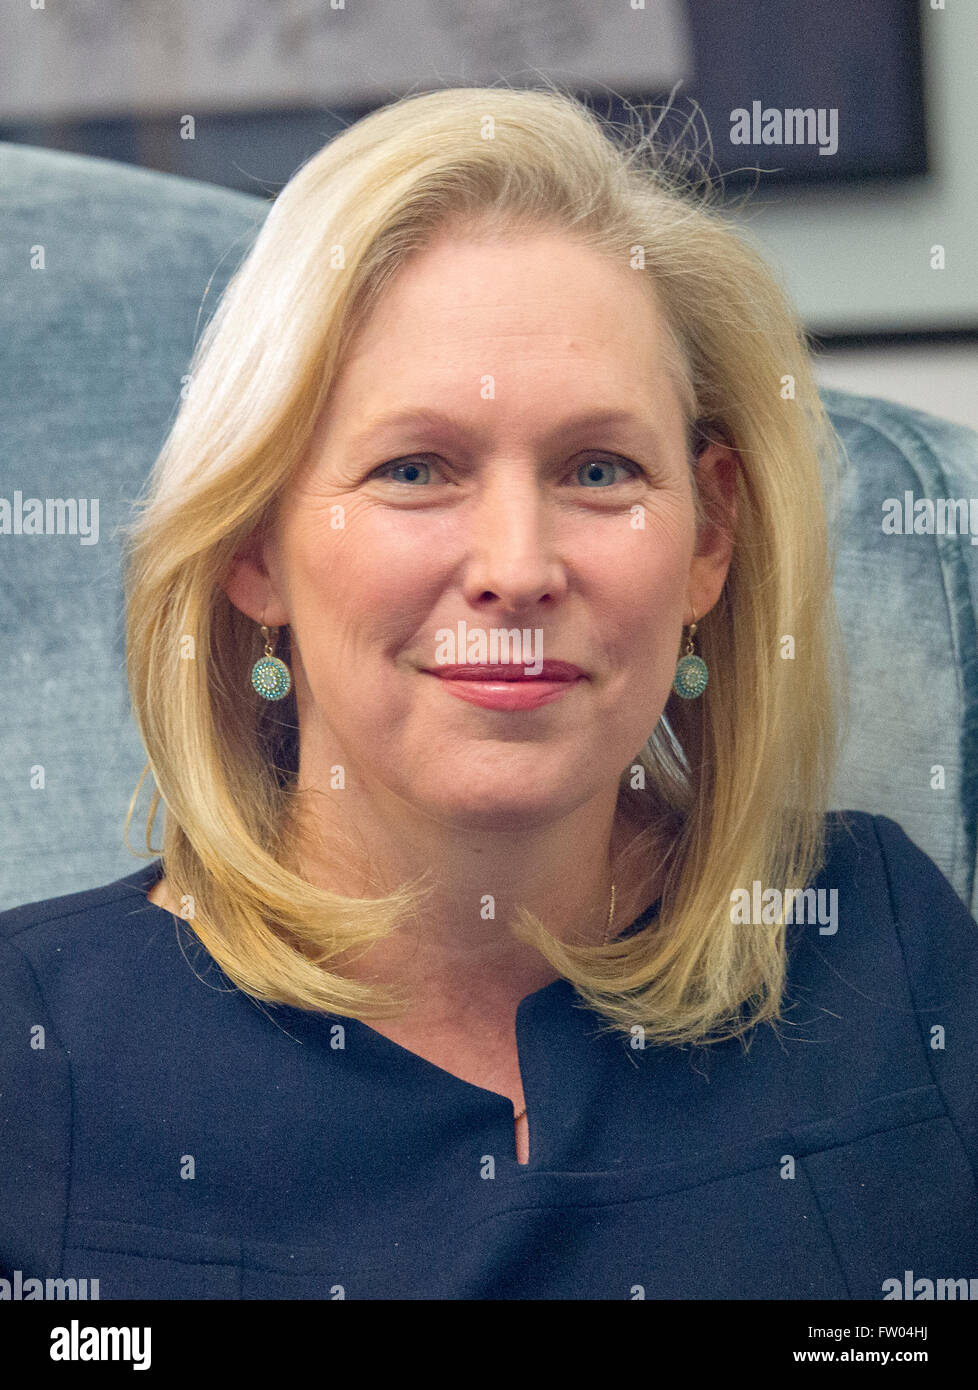 Washington DC, USA. 30th March, 2016. United States Senator Kirsten Gillibrand (Democrat of New York) as she meets with Judge Merrick Garland, chief justice for the US Court of Appeals for the District of Columbia Circuit, who is US President Barack Obama's selection to replace the late Associate Justice Antonin Scalia on the US Supreme Court, in her Capitol Hill office in Washington, DC on Wednesday, March 30, 2016. Credit: Ron Sachs/CNP - NO WIRE SERVICE - Stock Photo